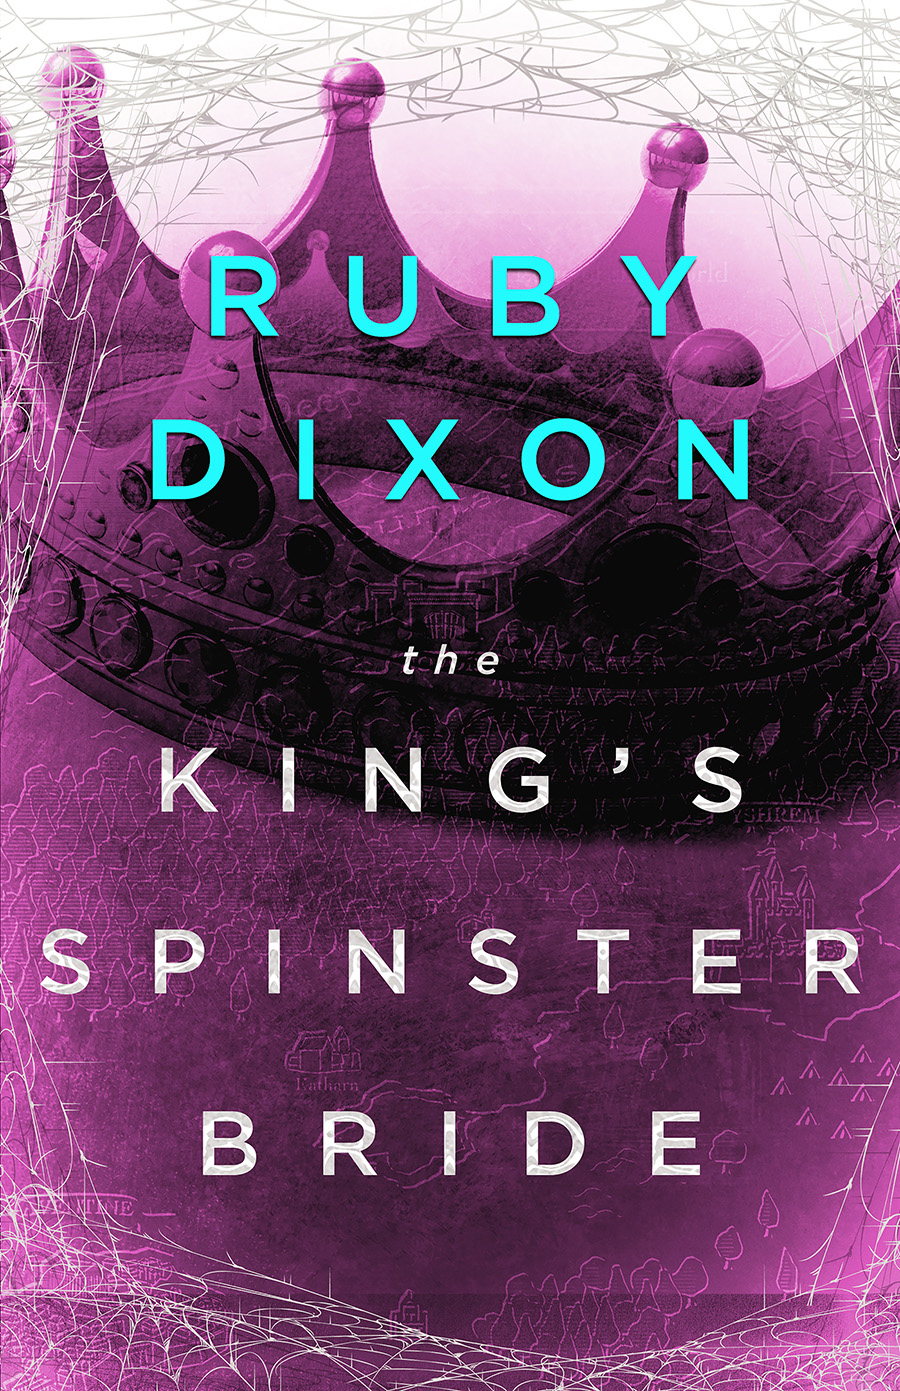 The King’s Spinster Bride